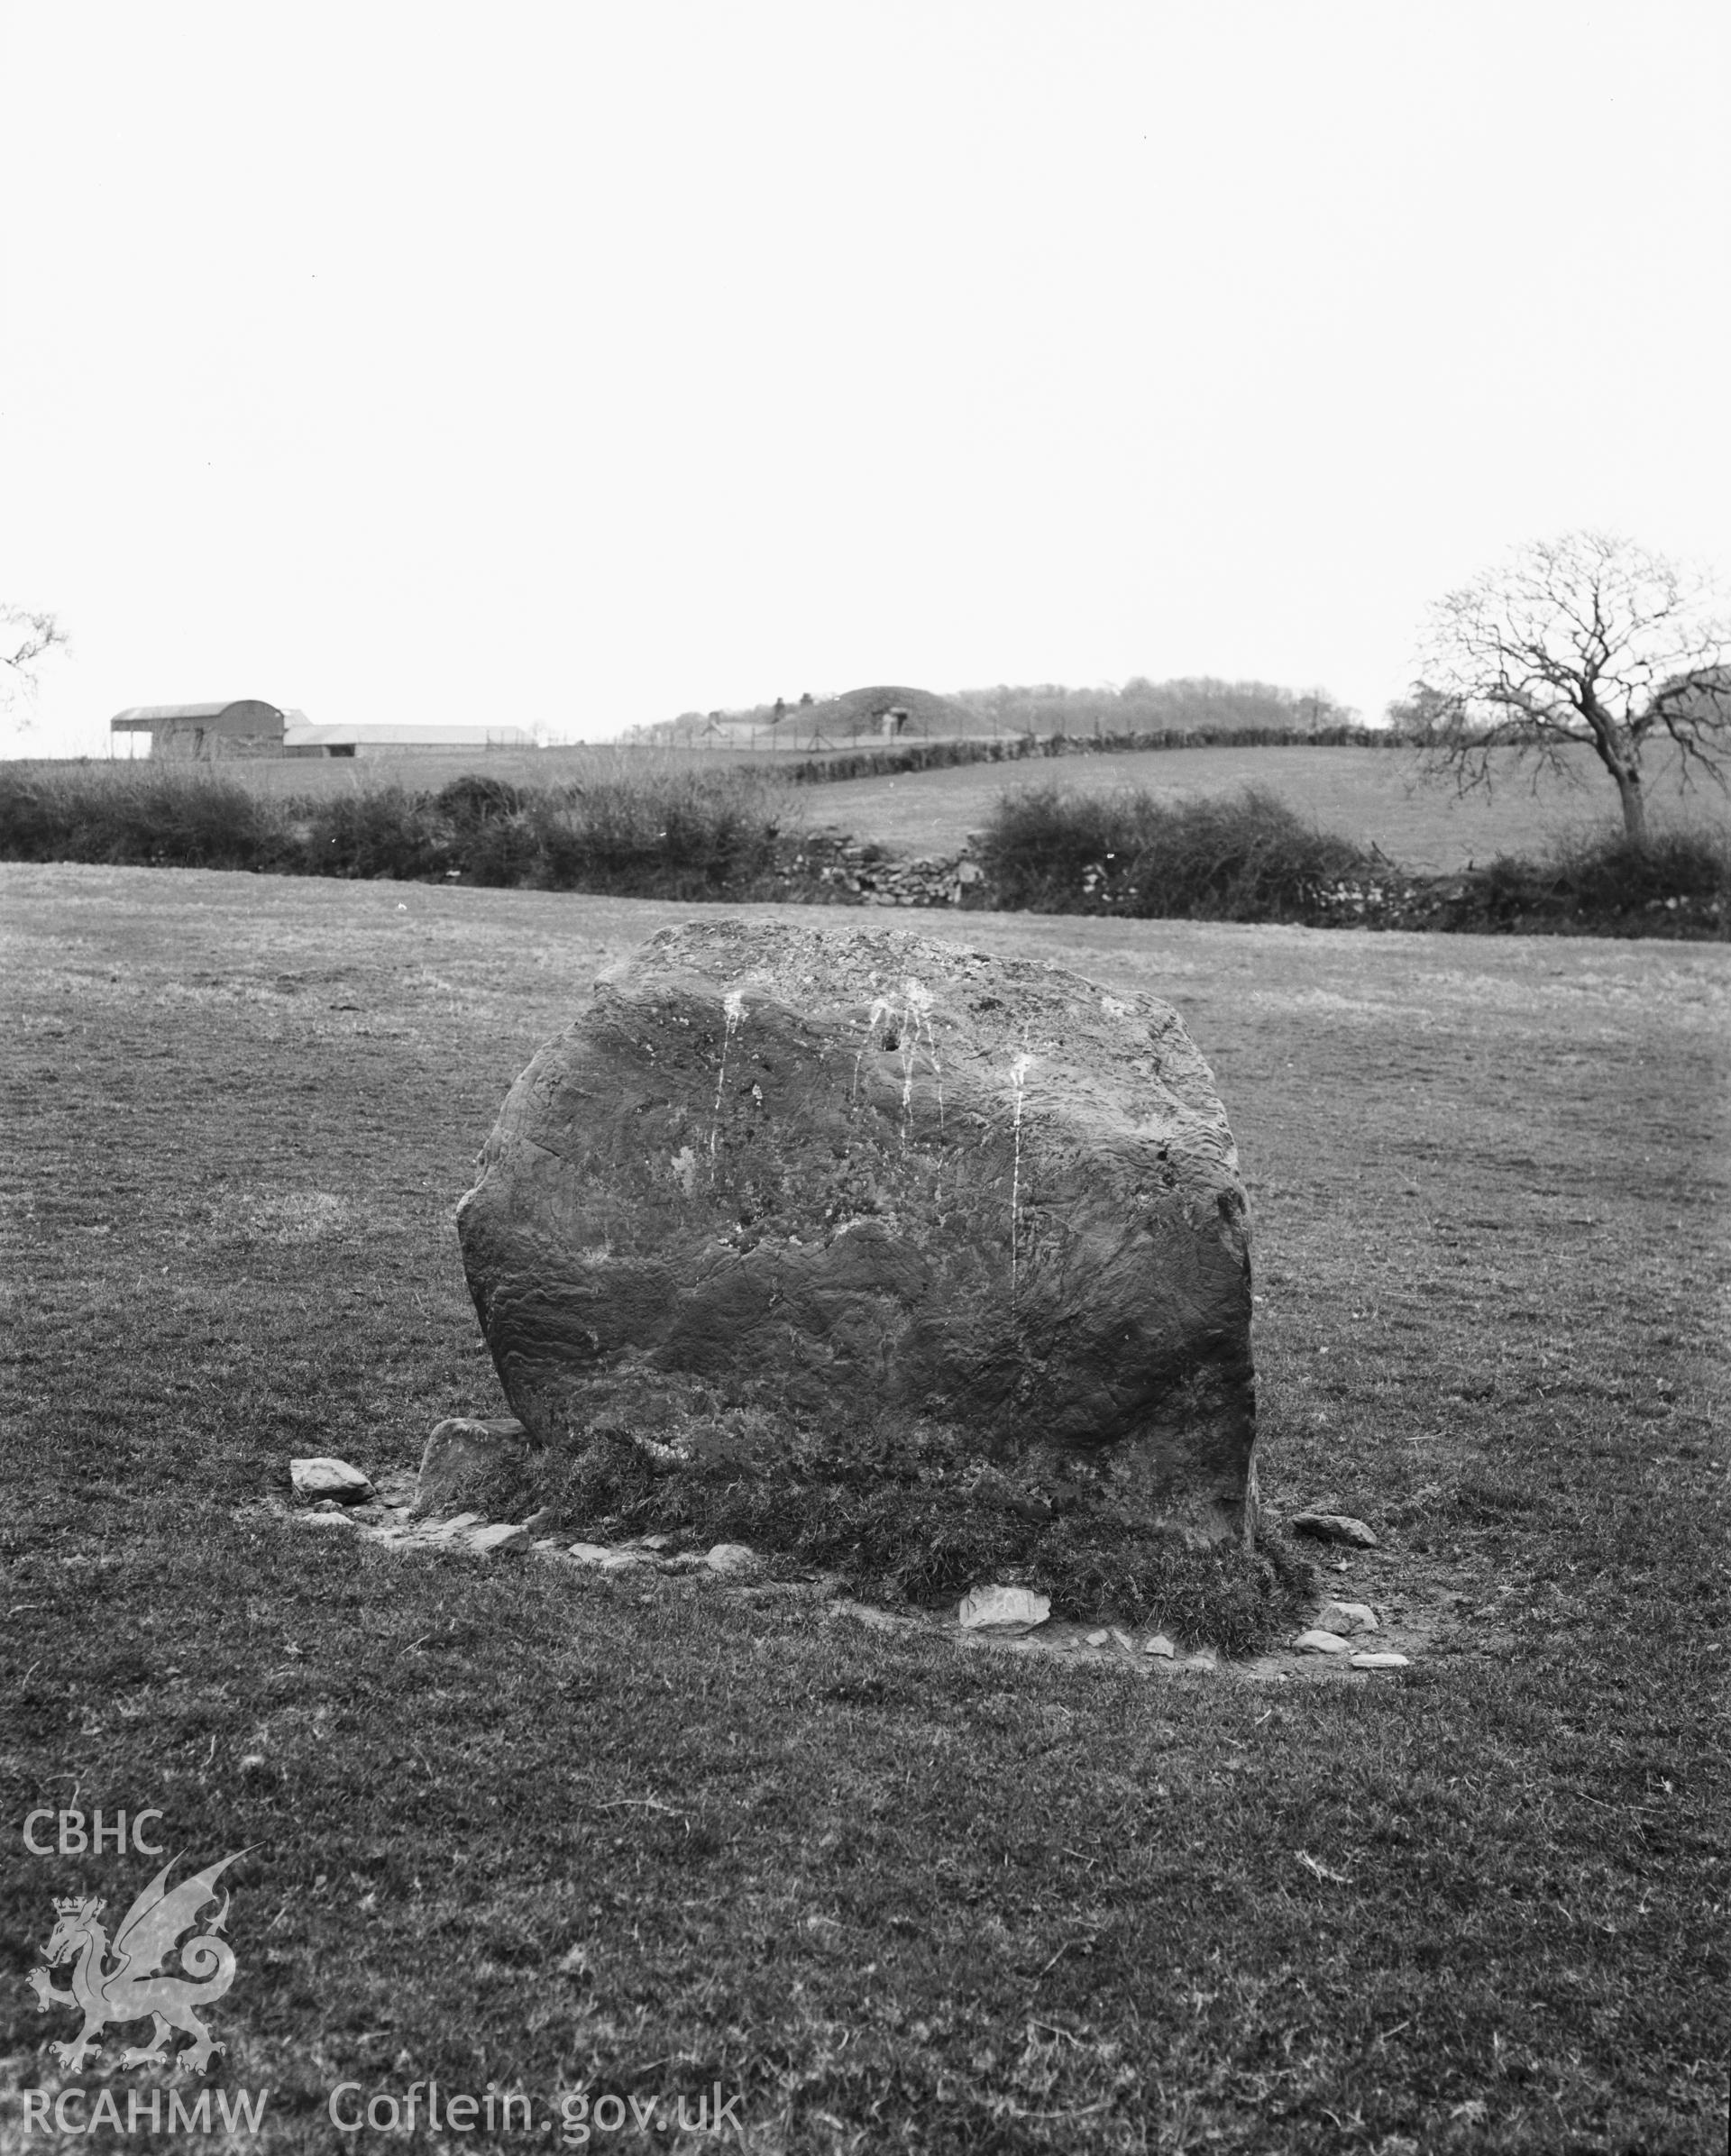 Black and white photograph showing Stone south-west of Bryn Celli Ddu, taken by RCAHMW before 1960.